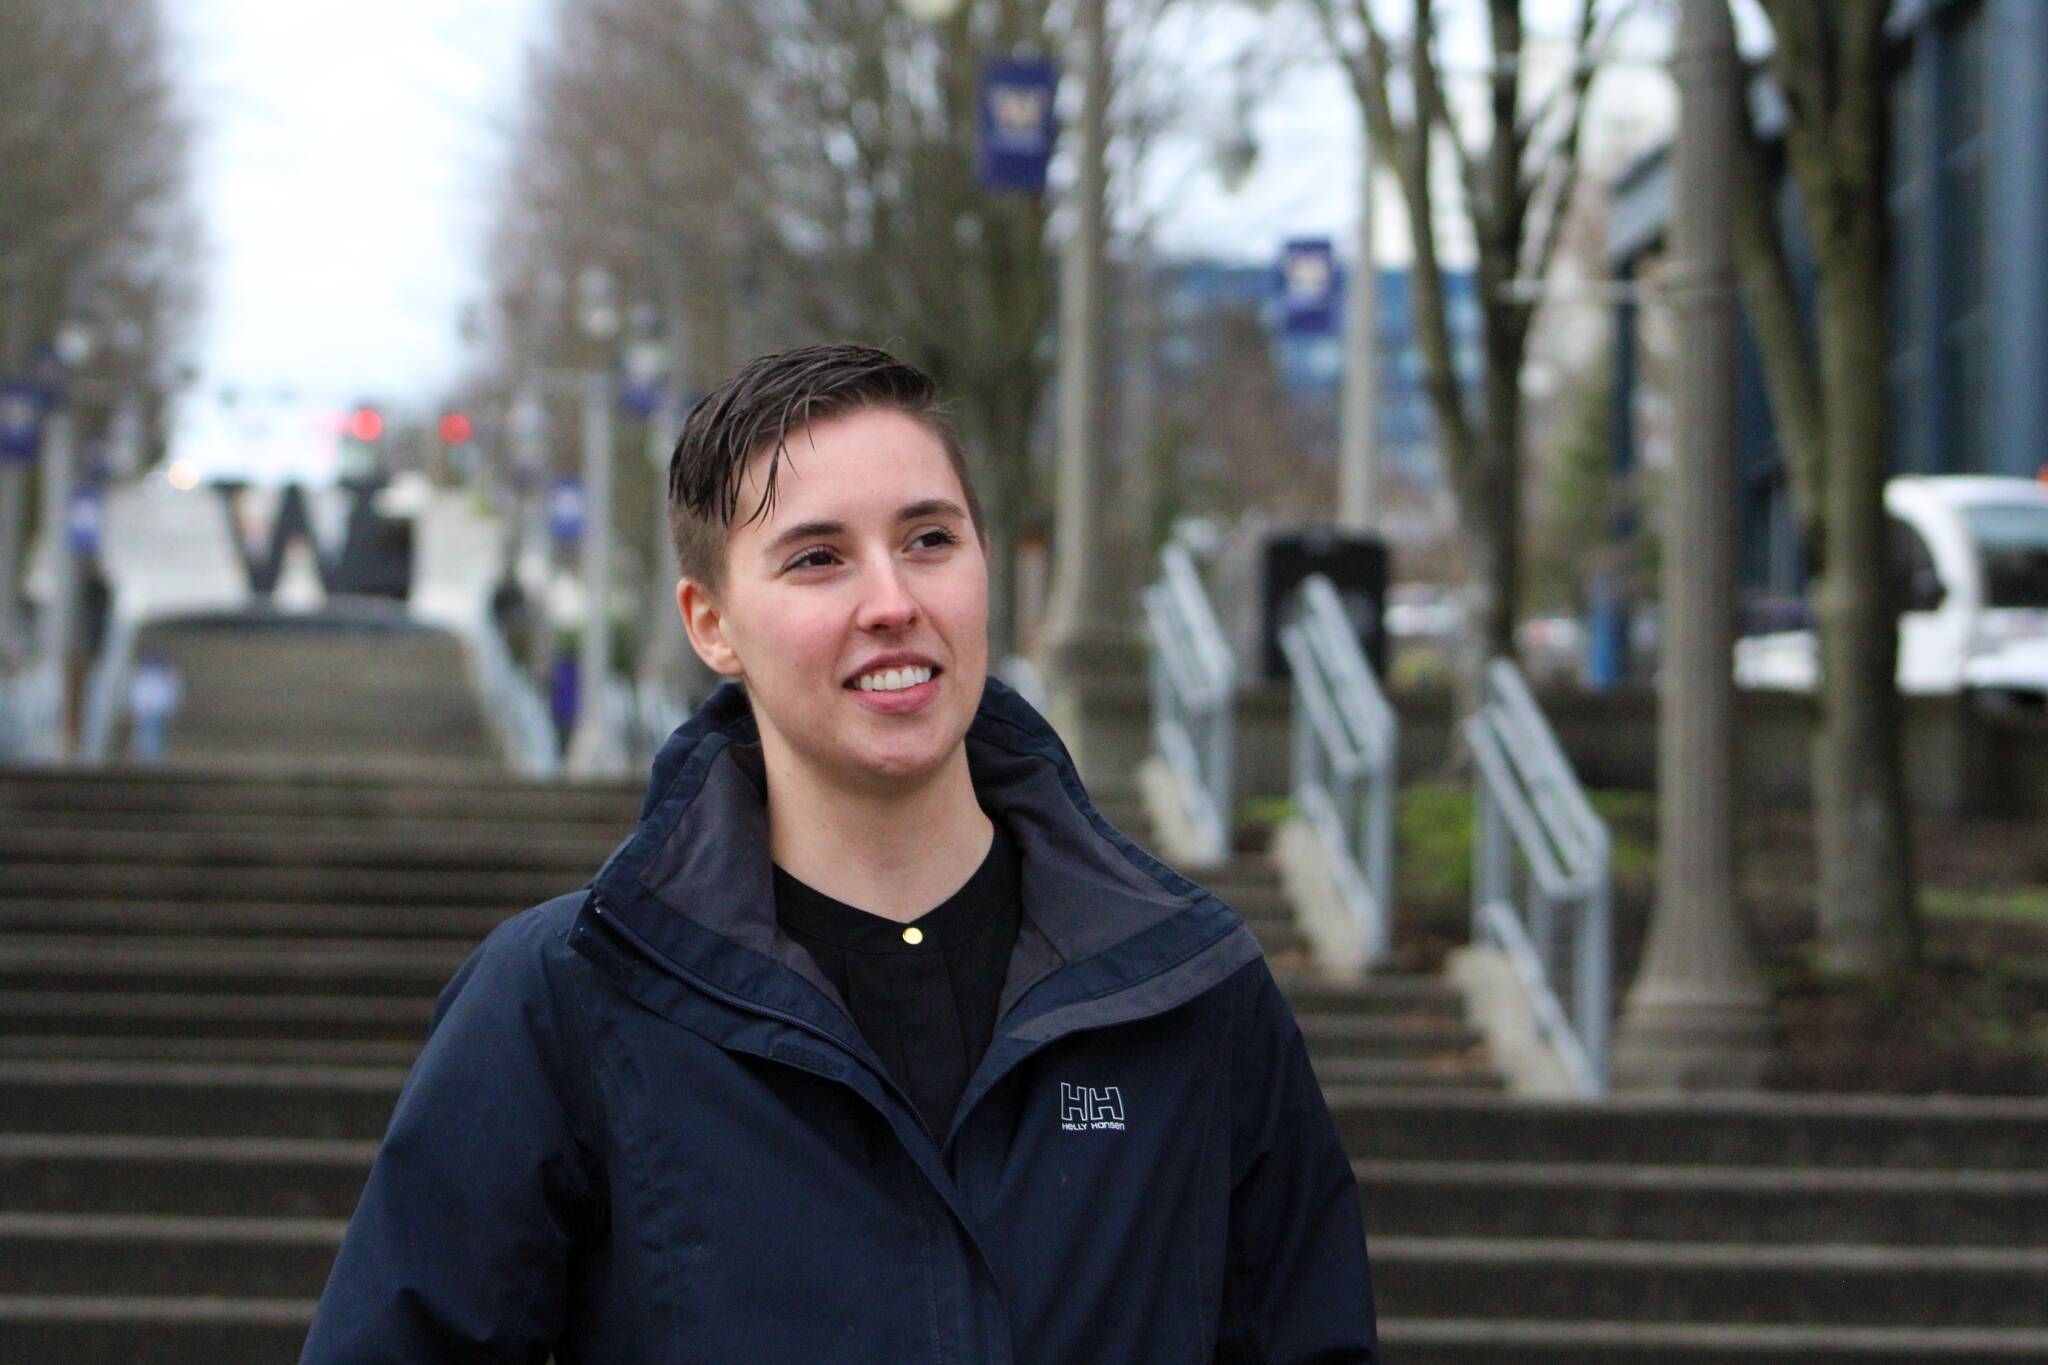 Melissa Swain poses for a picture at the University of Washington Tacoma, where she takes classes, on the afternoon of Feb. 22. Alex Bruell / The Mirror